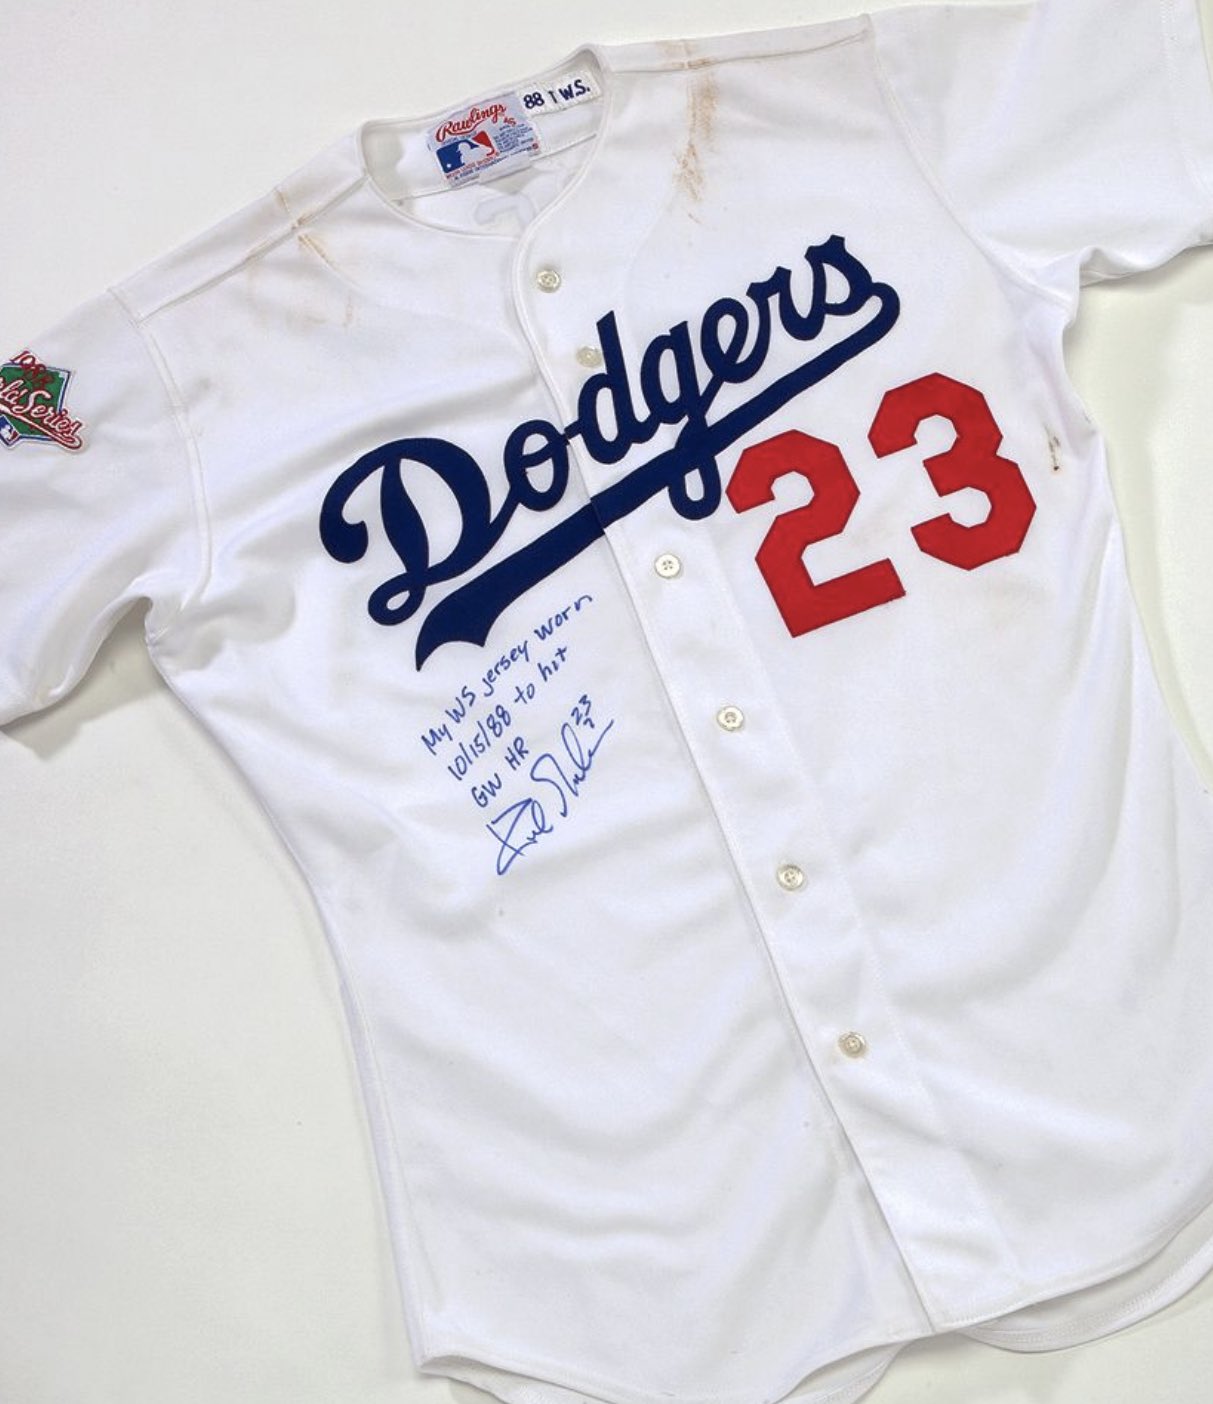 Darren Rovell on X: In 2010, Kirk Gibson's jersey from Game 1 of the 1988  World Series sold for $303K and his bat sold for $880K. The ball was never  found.  /